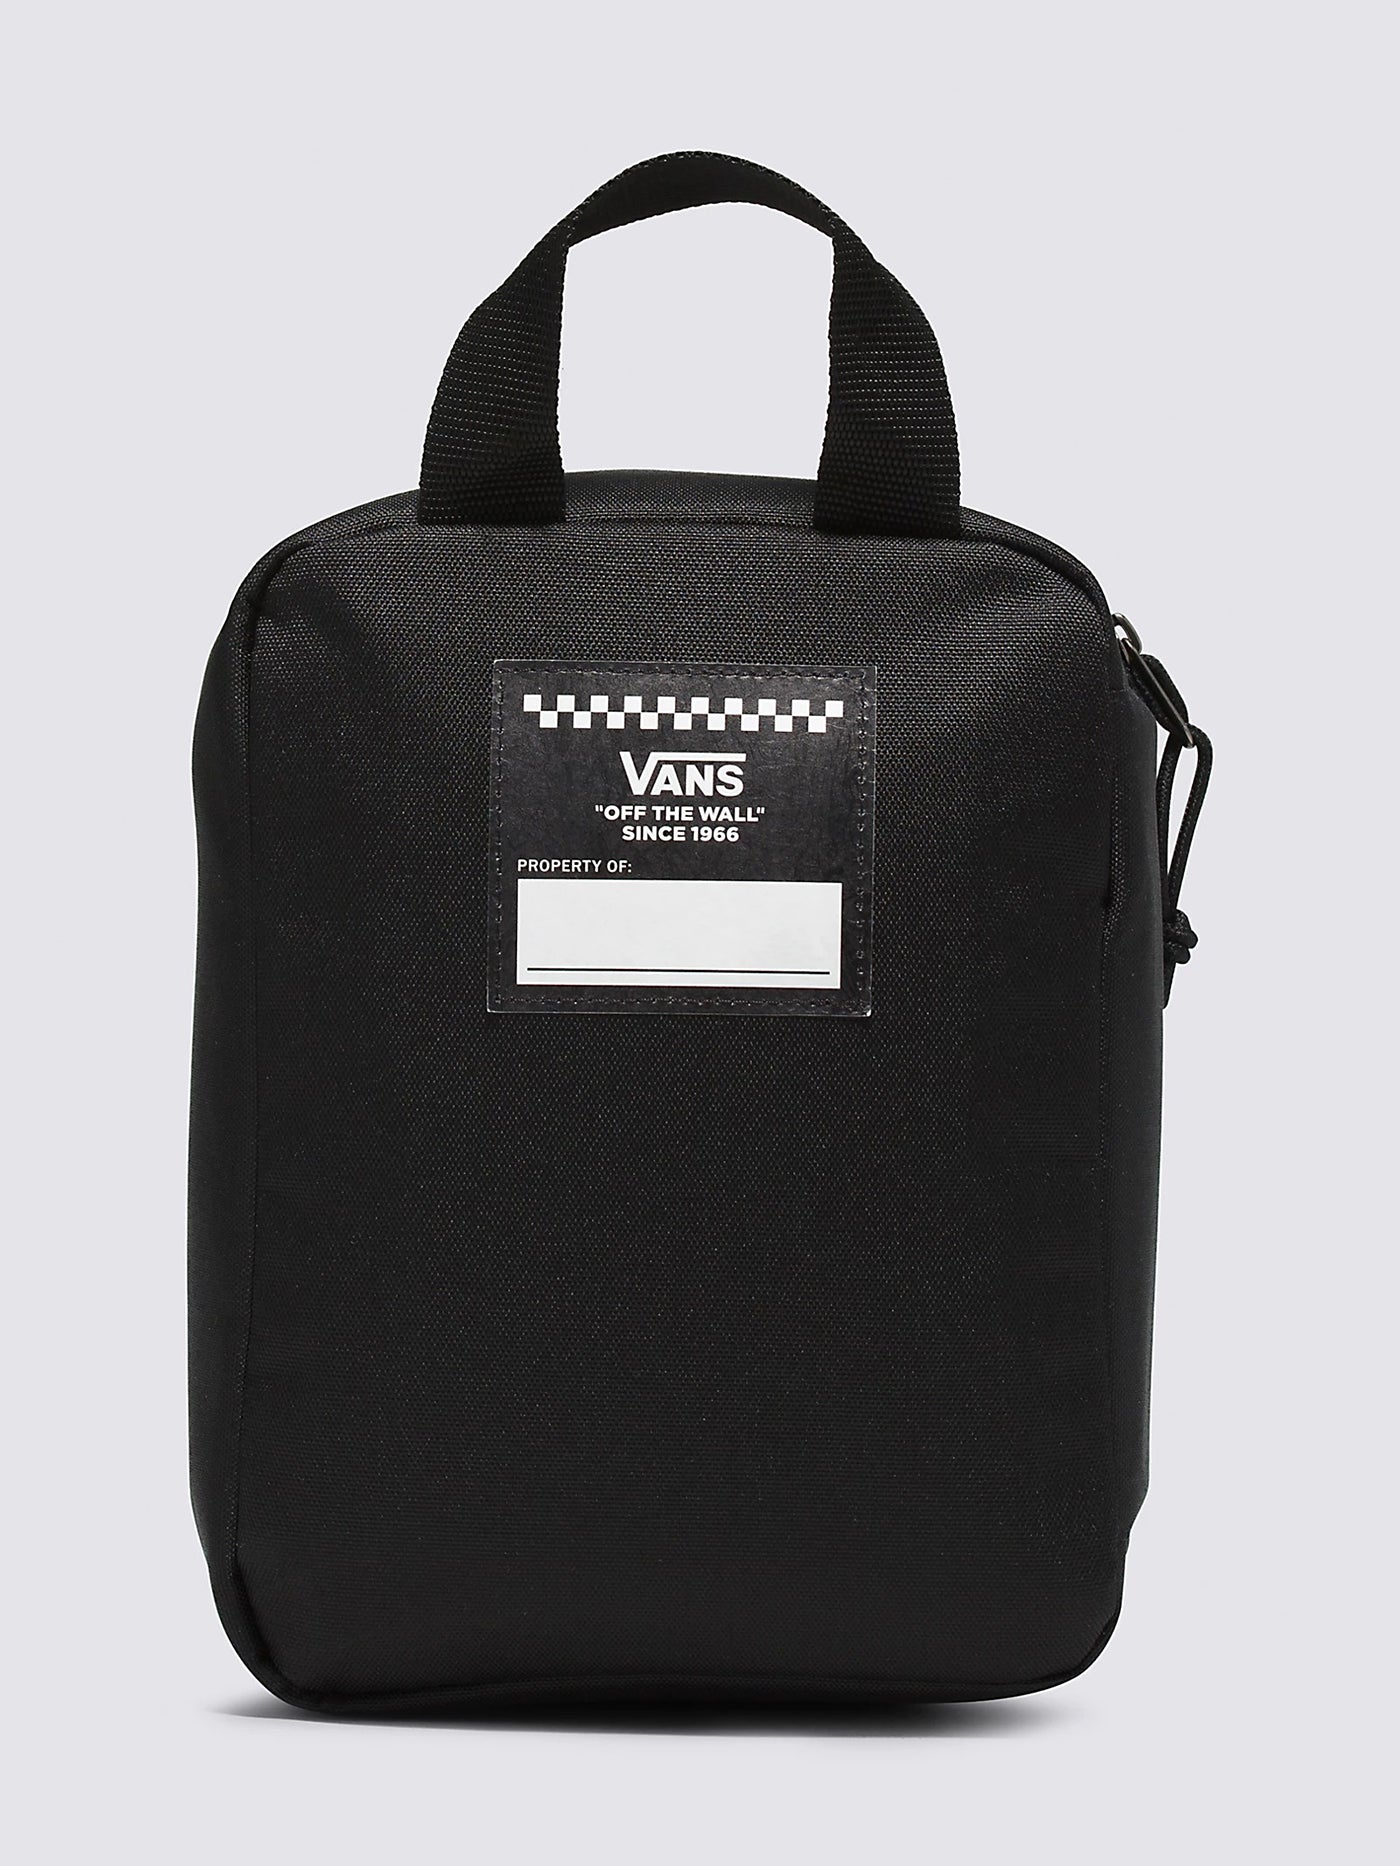 Vans Realm Lunch Box